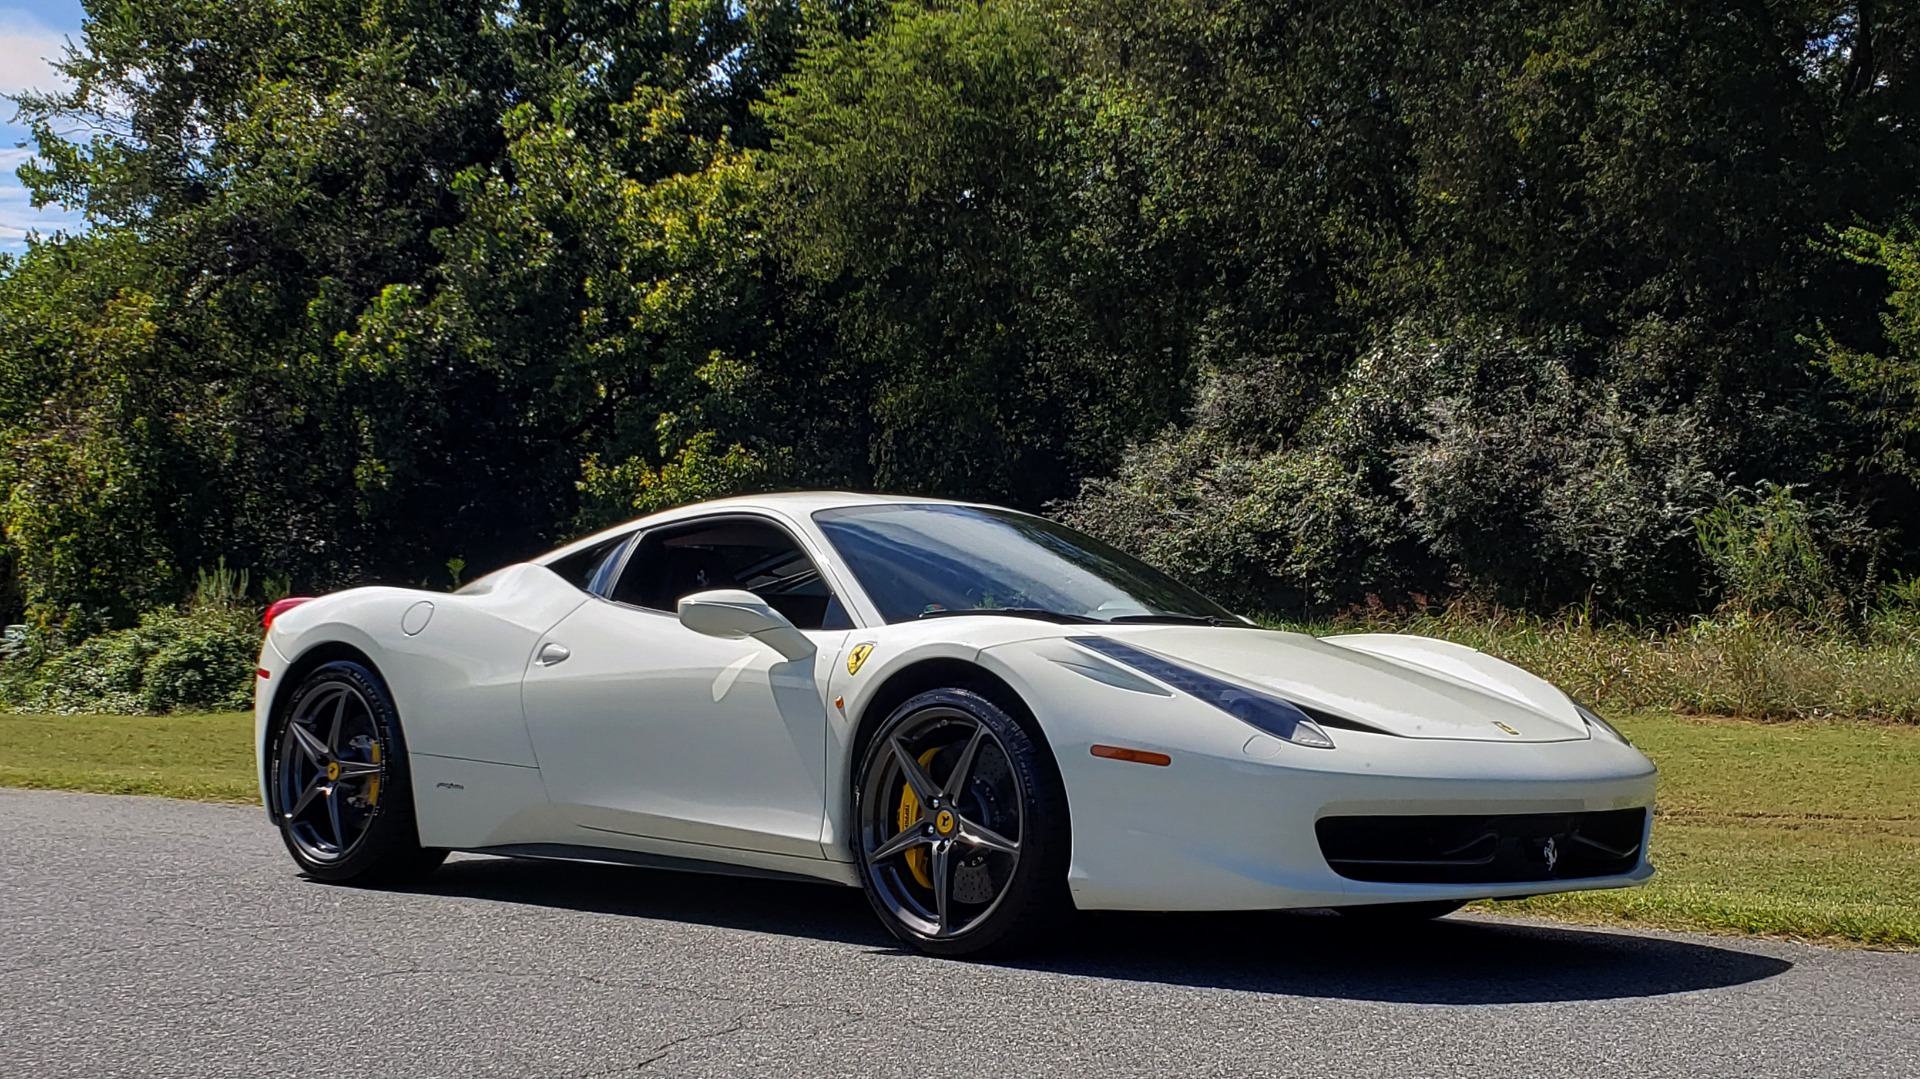 Used 2012 Ferrari 458 ITALIA COUPE / 4.5L V8 / 7-SPEED AUTO / LOW MILES SUPER CLEAN for sale Sold at Formula Imports in Charlotte NC 28227 15